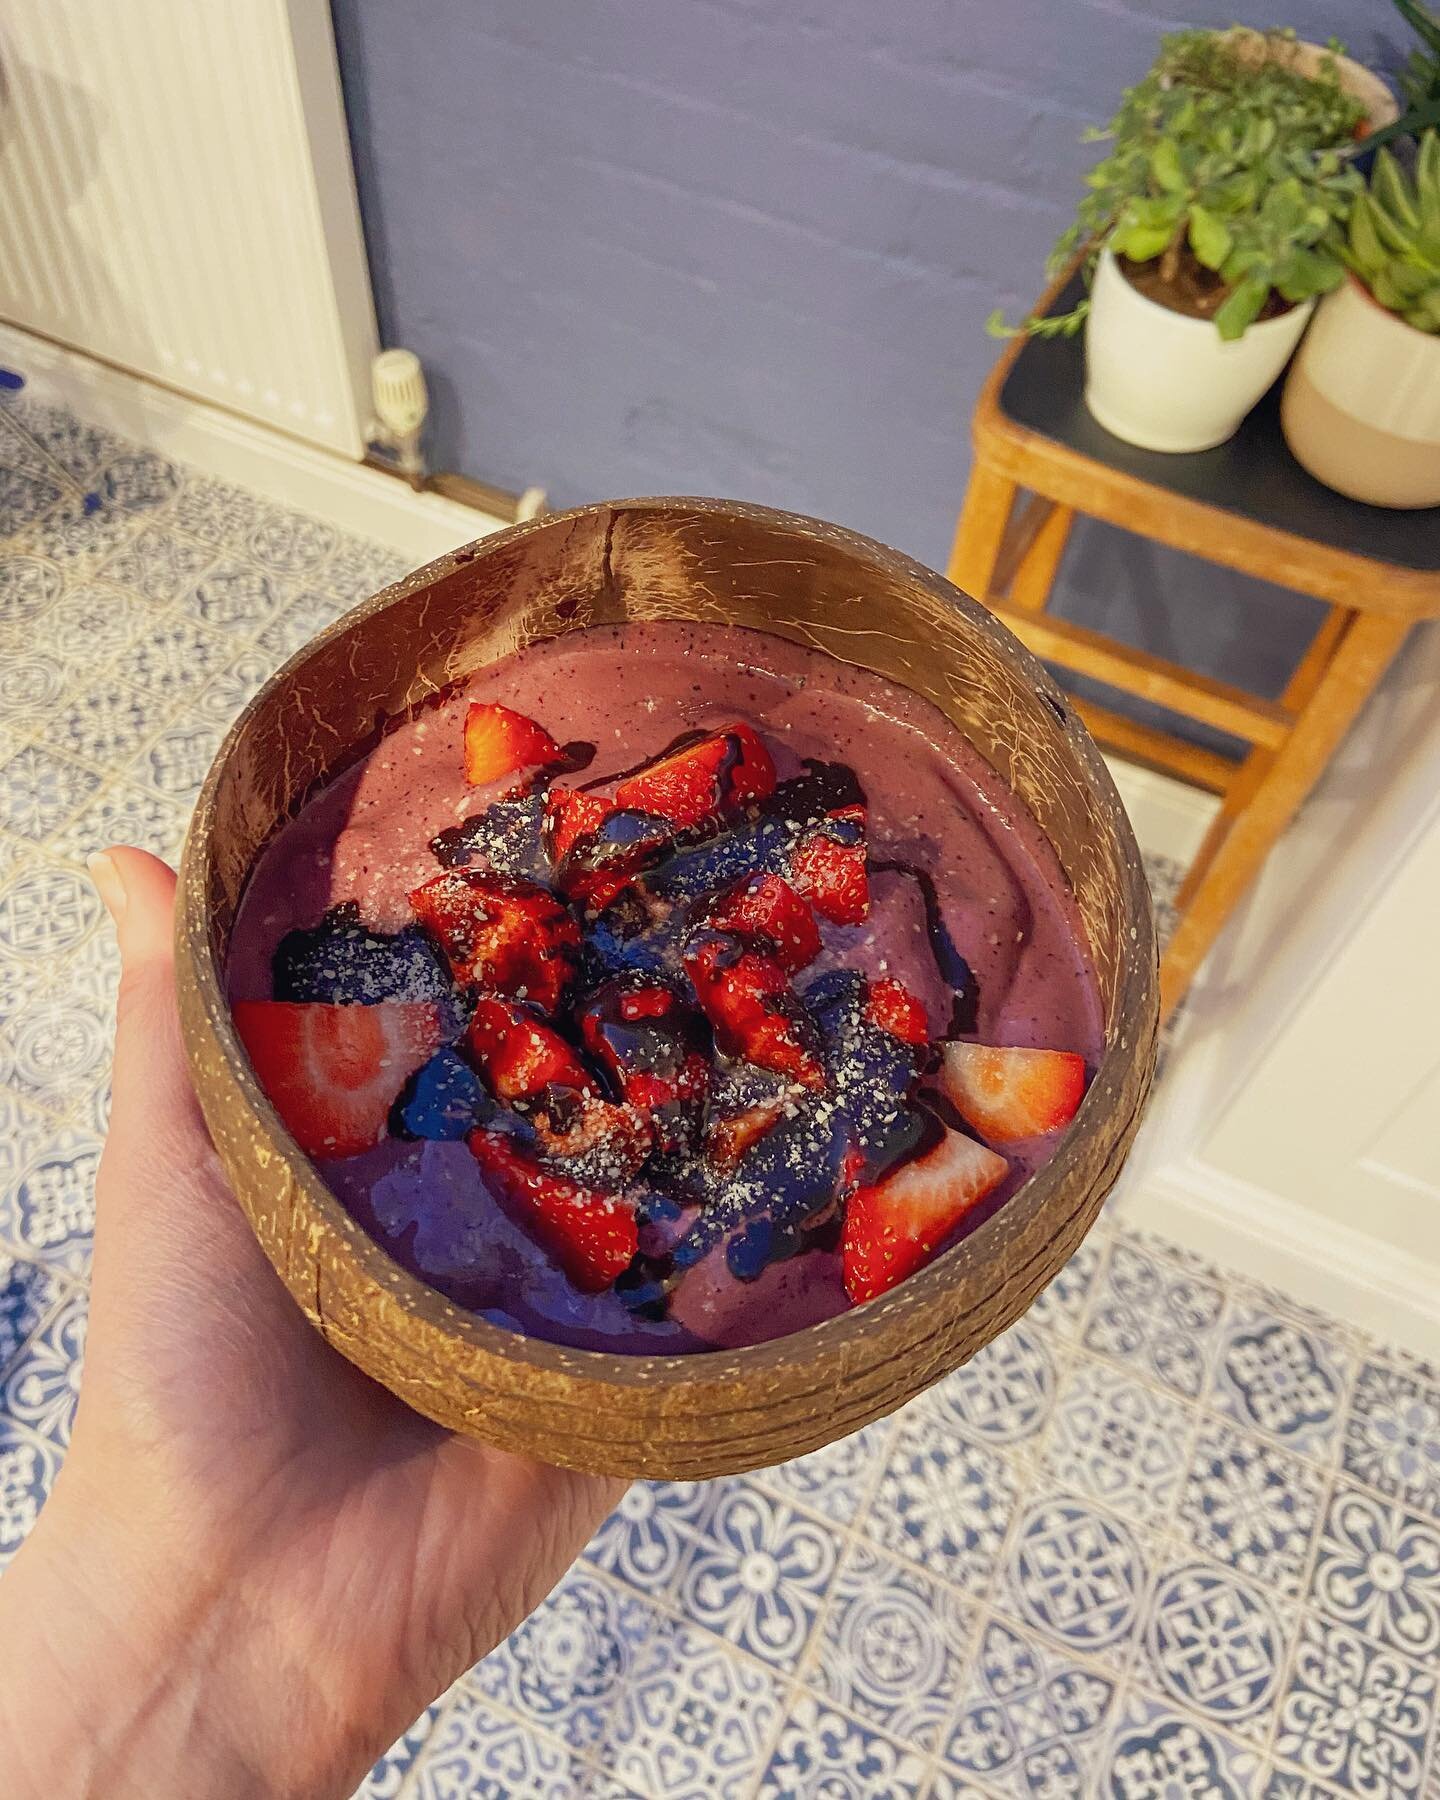 Breaking up the gym content (not that there&rsquo;s much of it 😬) with an aesthetic smoothie bowl 💜

Is anyone else obsessed with them at the moment or is it just me? I&rsquo;m an oats in winter and smoothies in spring/summer kinda gal, as soon as 